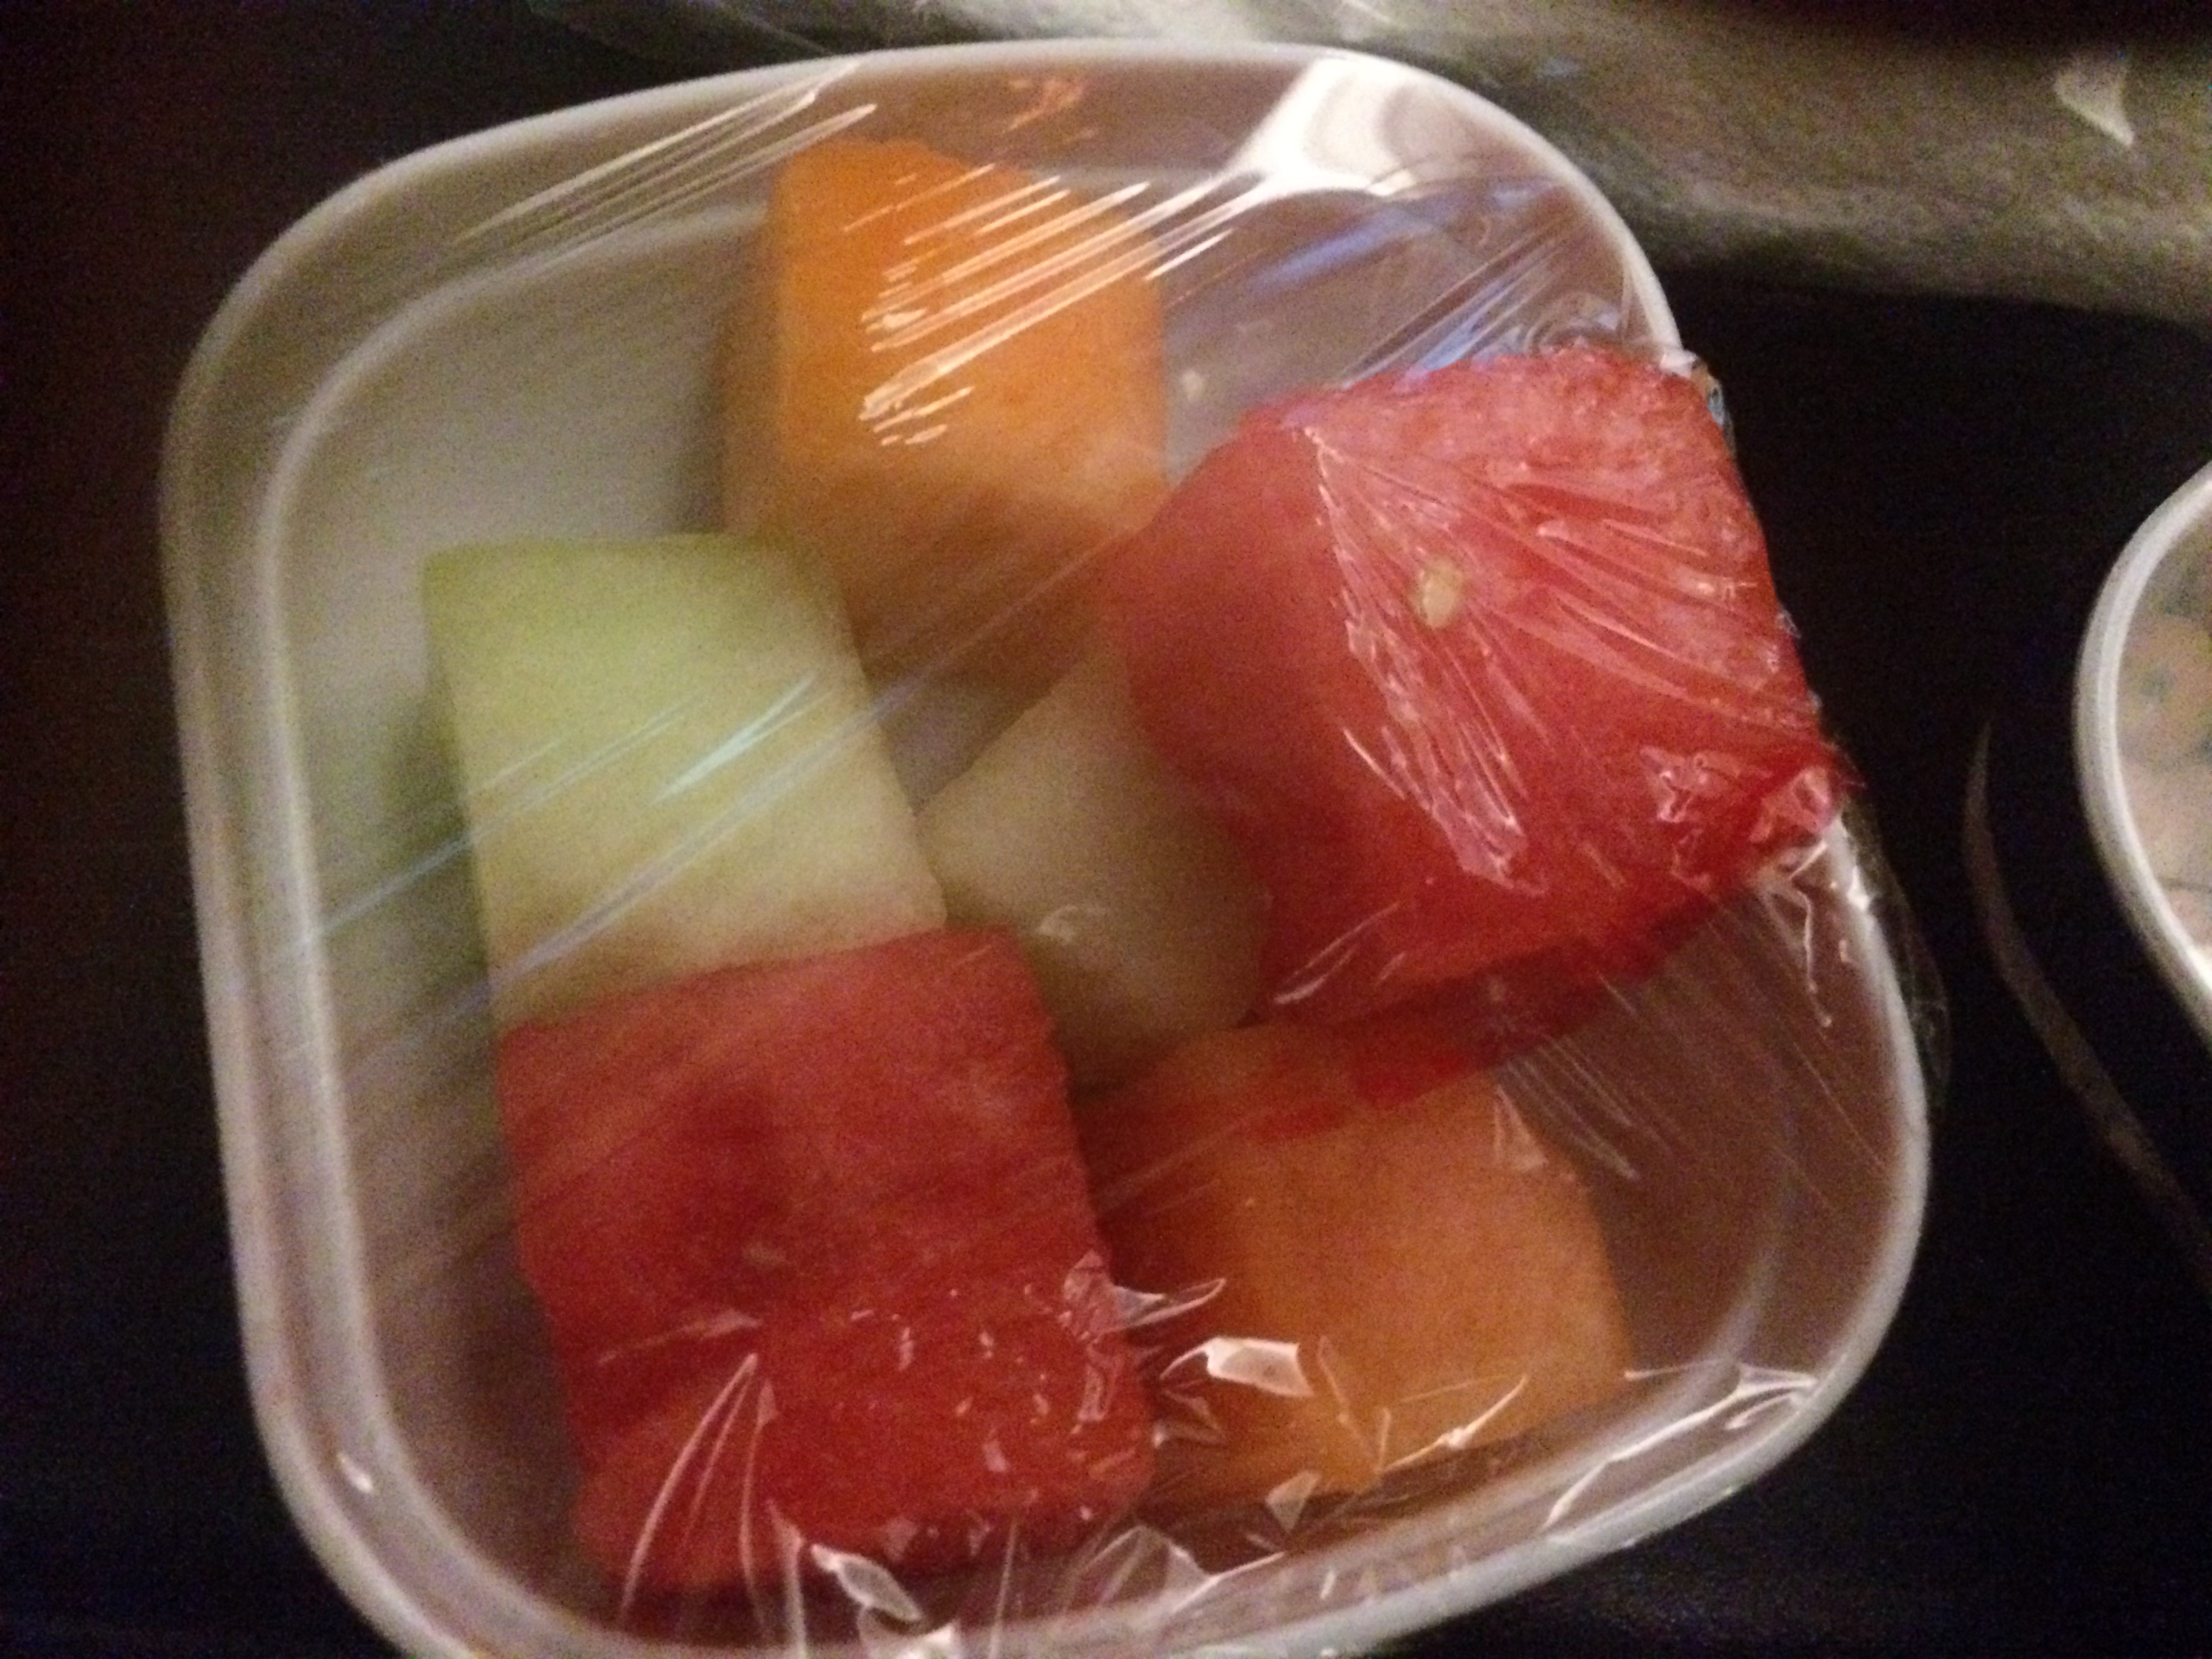 a plastic wrap around a container of fruit